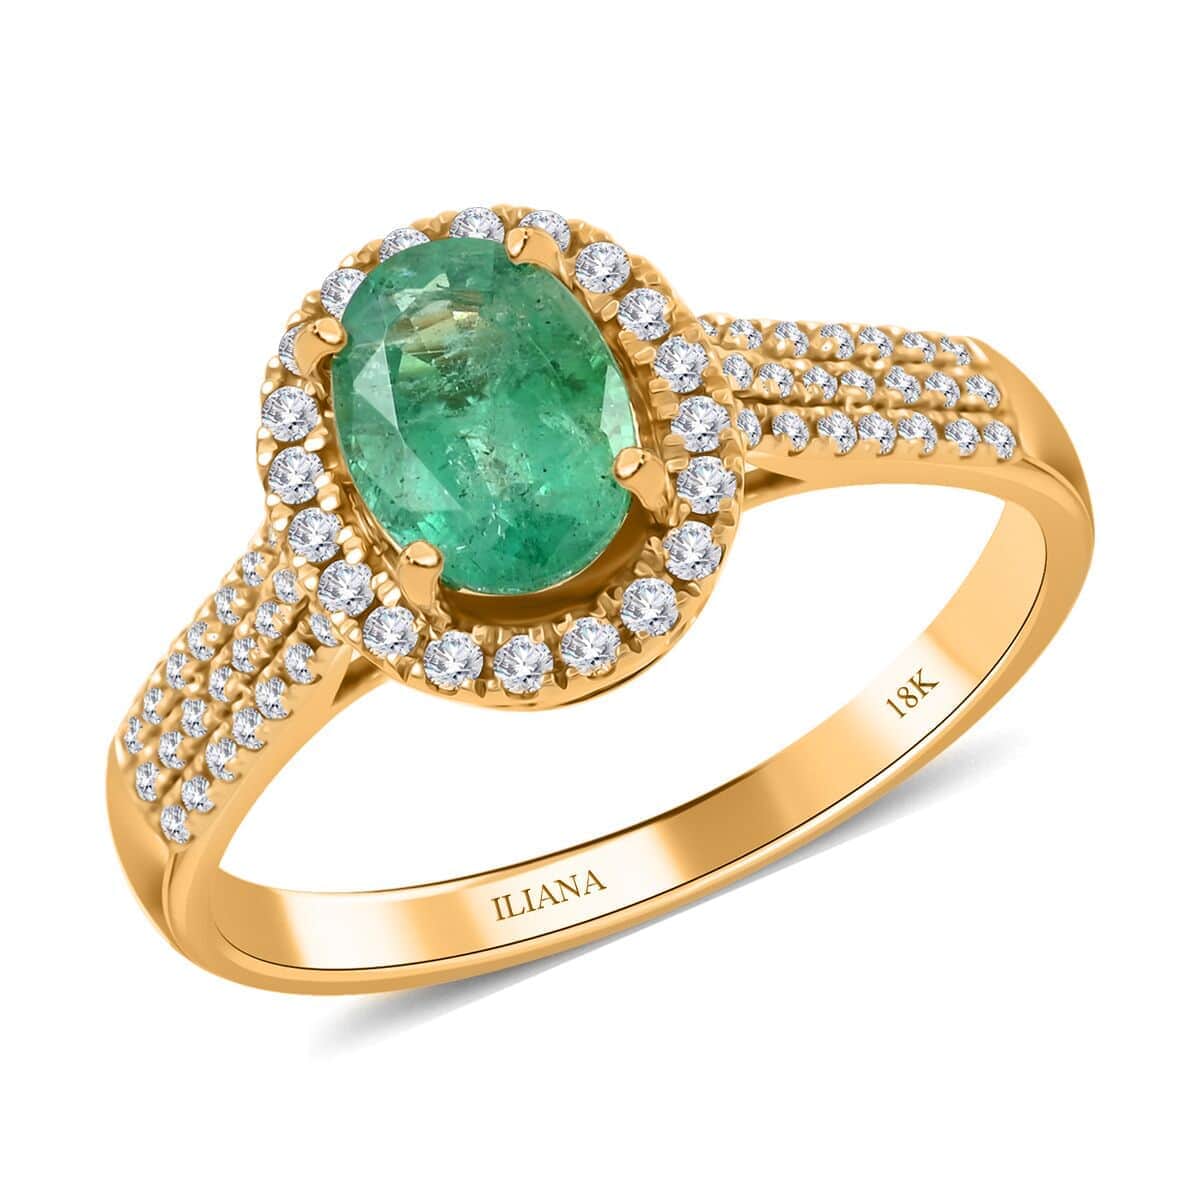 Certified Iliana 18K Yellow Gold AAA Kagem Zambian Emerald and G-H SI Diamond Ring 2.85 ctw (Del. in 3-5 Days) image number 0